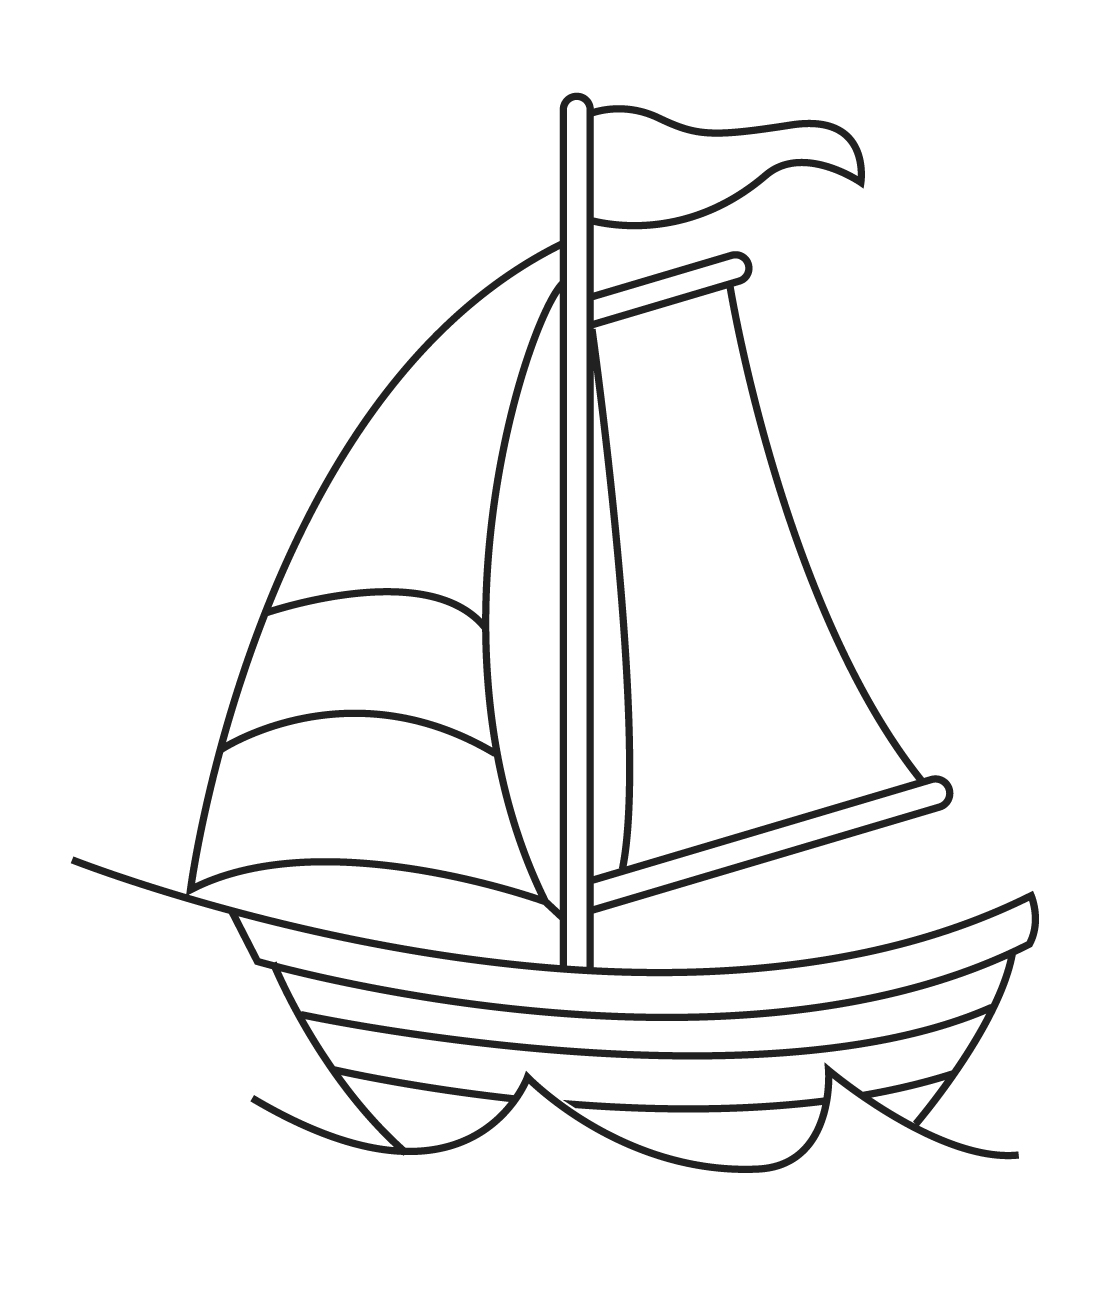 Images For > Boat Drawing For Kids